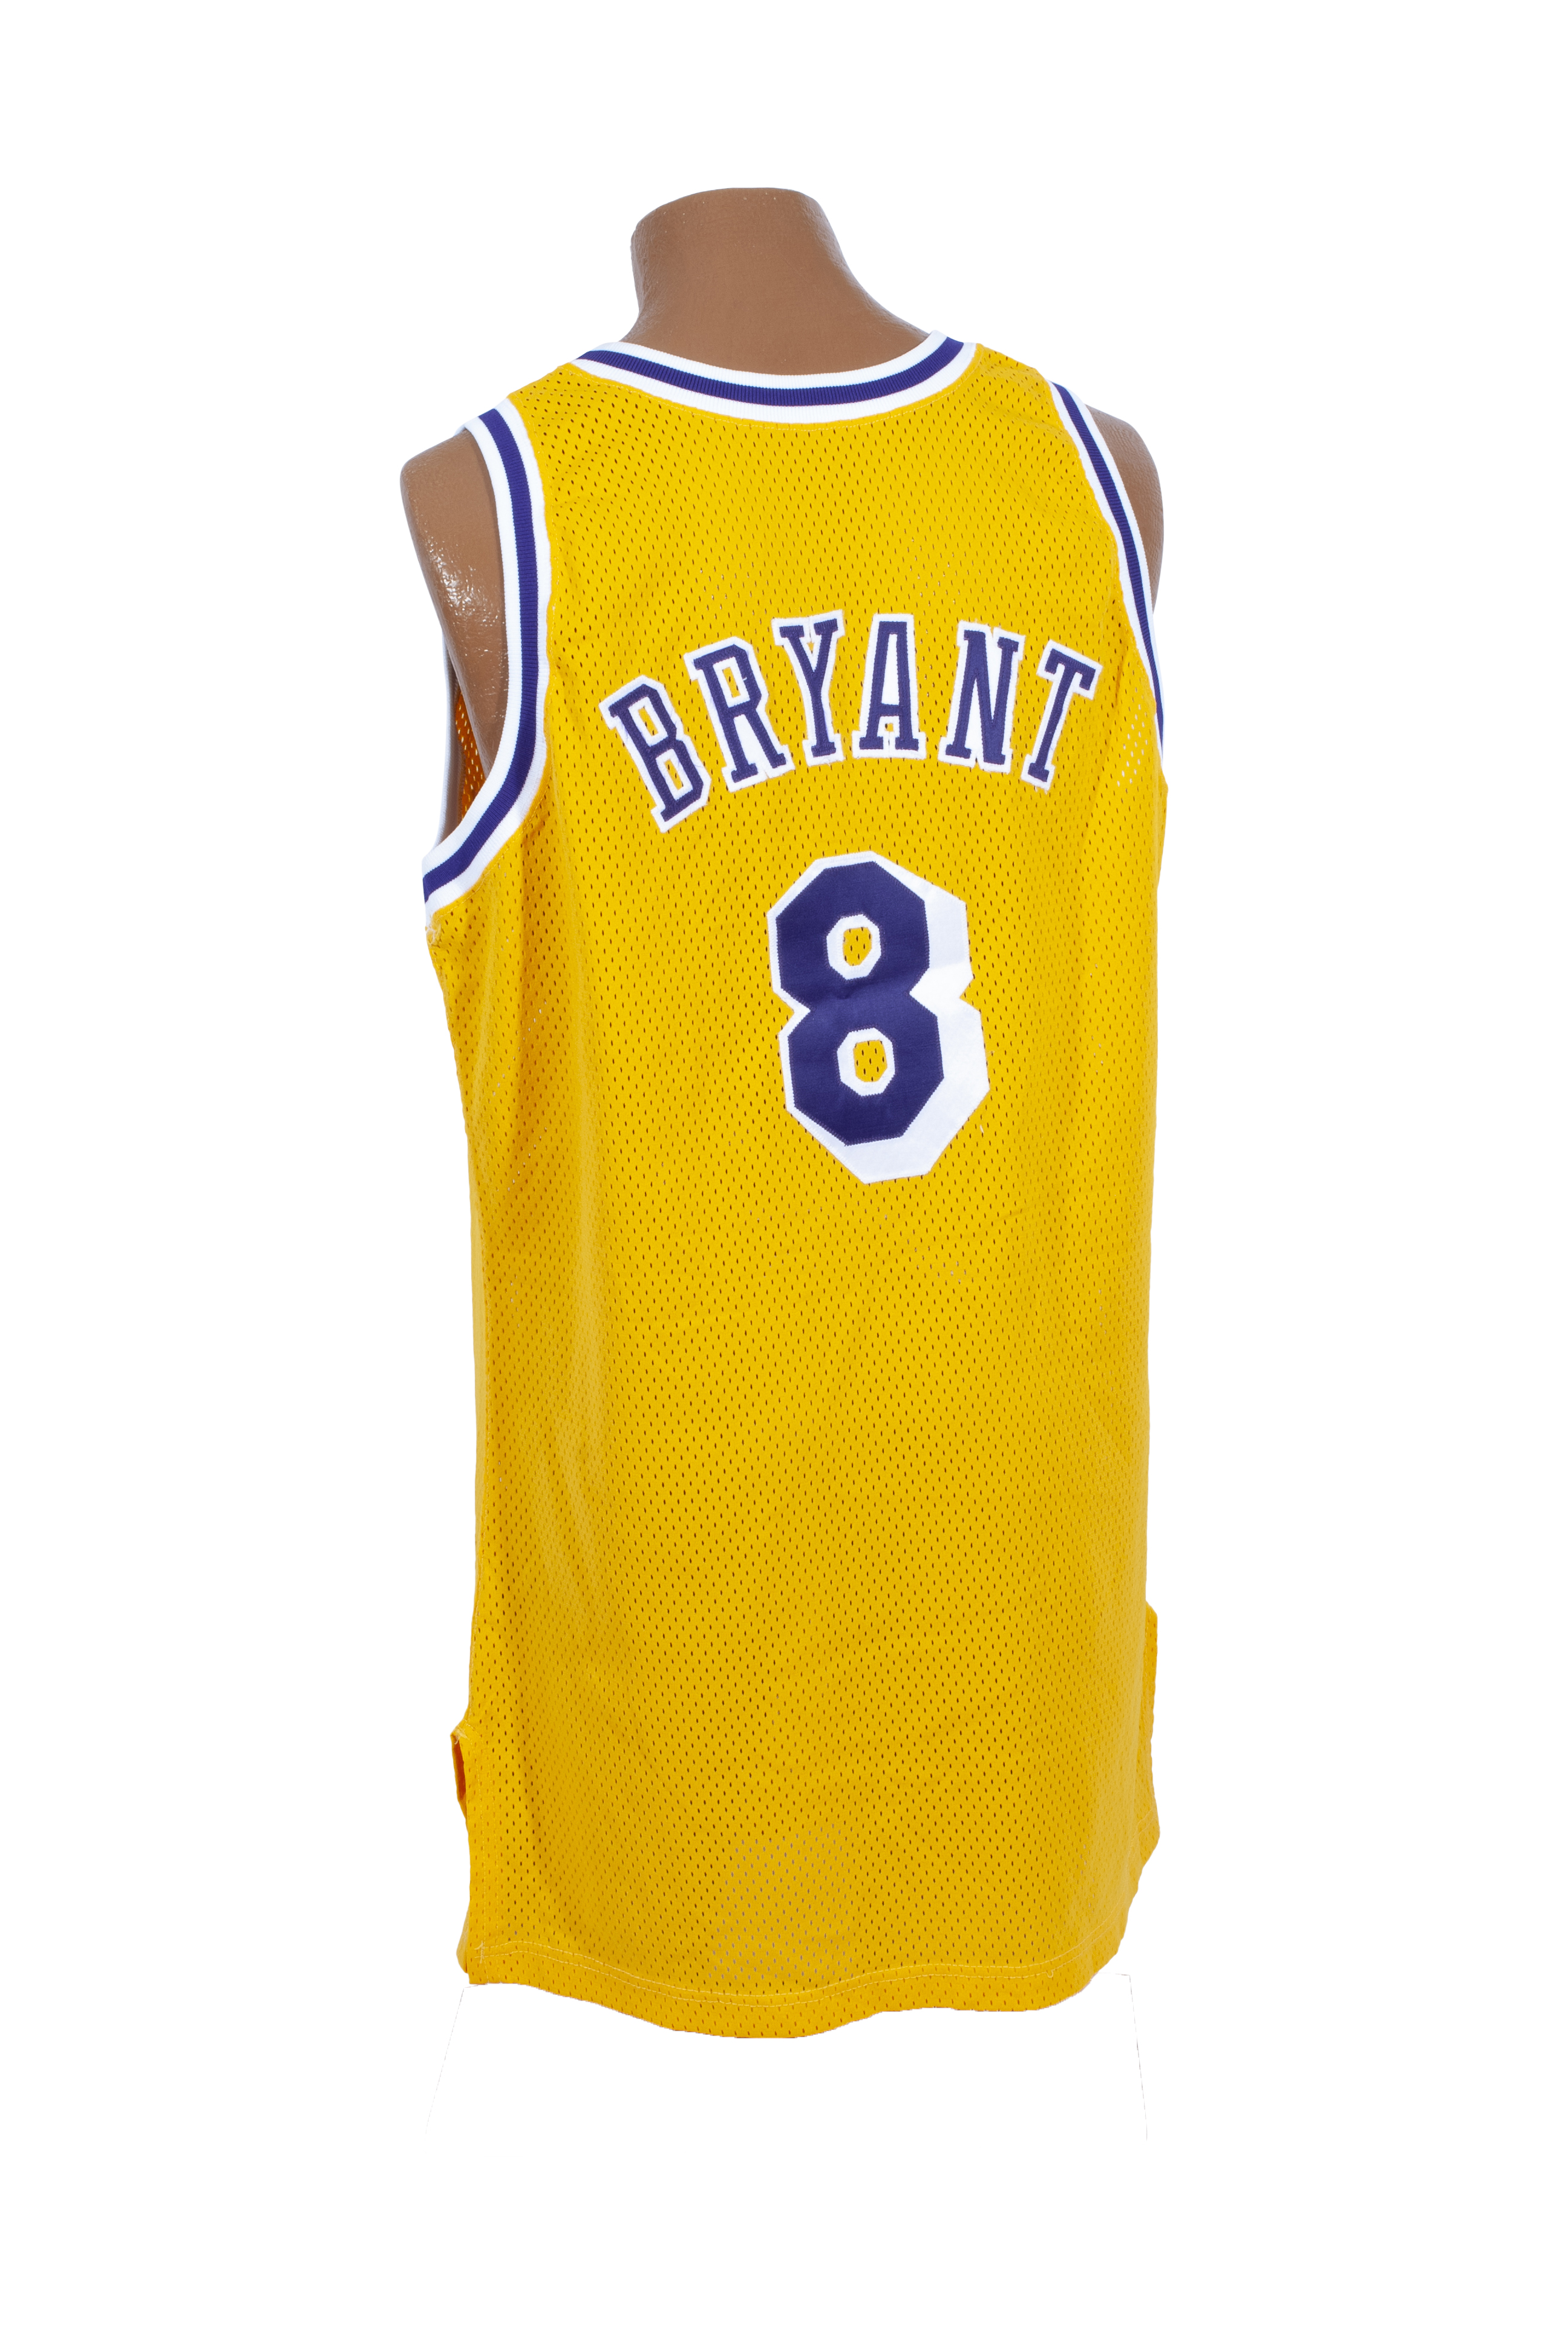 Game-worn Kobe Bryant rookie jersey up for auction, could fetch a